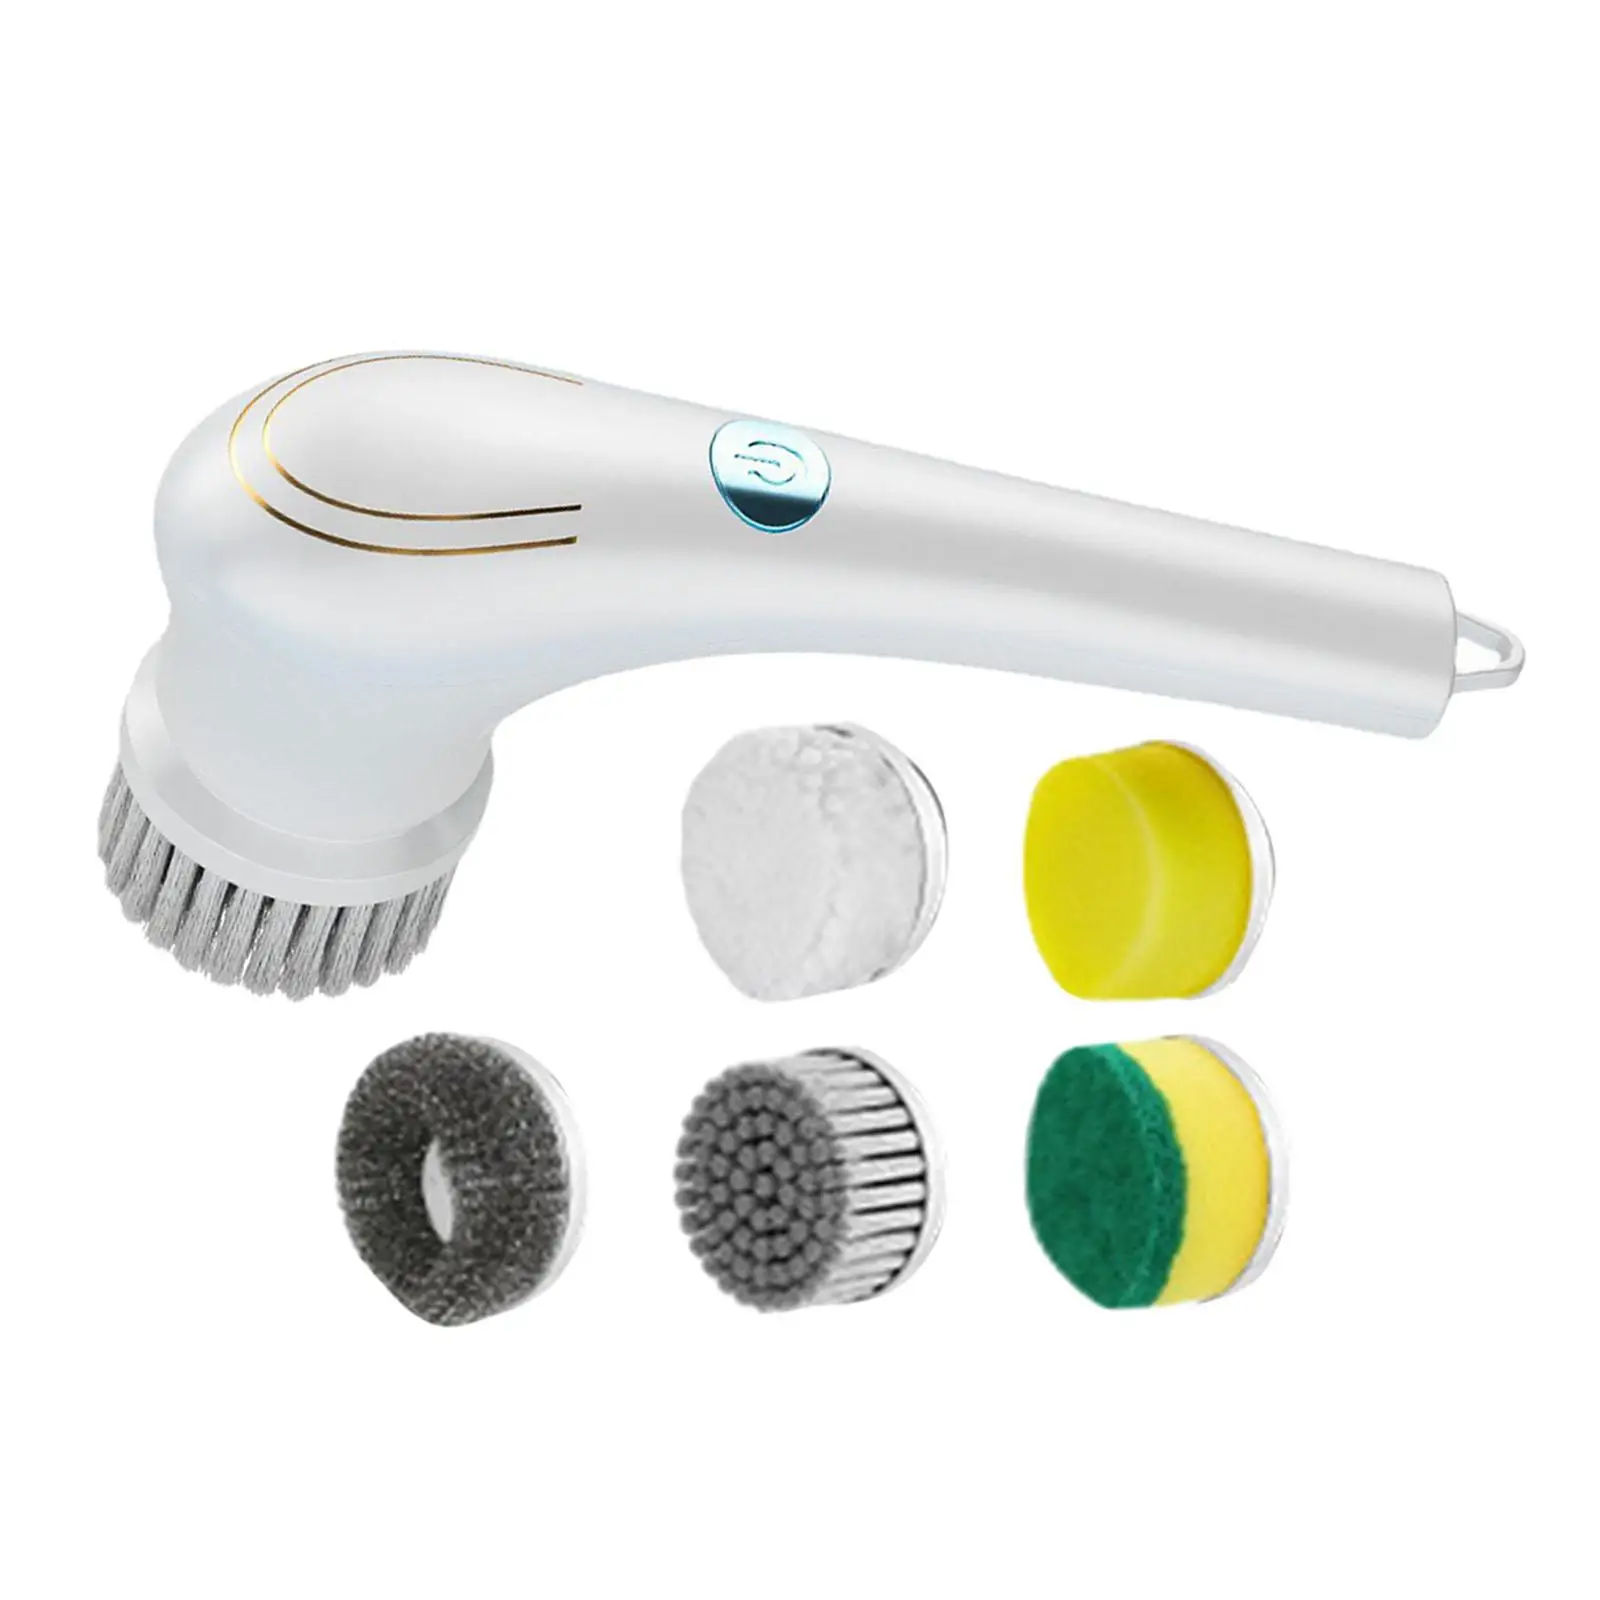 Electric Scrubber Household Tools Multifuctional for Kitchen Dishes Bathroom